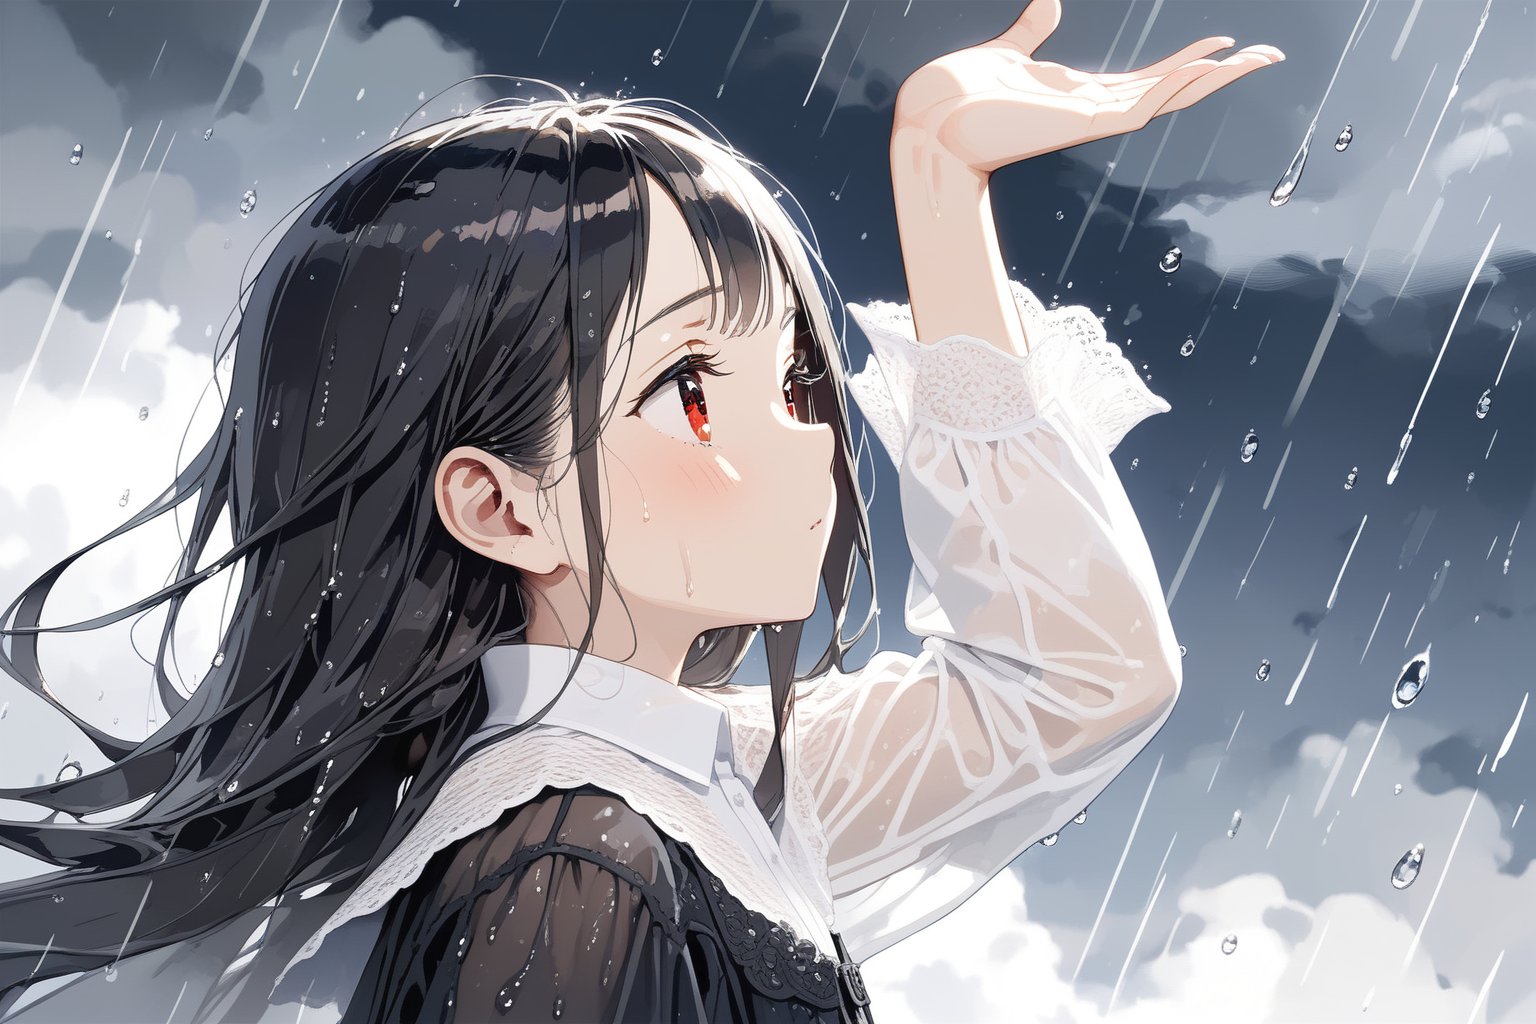 //quality, masterpiece:1.4, detailed:1.4,best quality:1.4,//(heavy raining),night, (cloudy),fog,//,1girl,solo,//, black_hair,long hair, straight_hair,sidelocks,red_eyes, detailed_eyes, eye_half_opened,//,(black dress), (white shirt),long_sleeves,(white sleeves),(wet),wet hair,wet clothes,//,closed_mouth, blush,glommy face,(looking_up),//,one_arm_raised above head,one_hand_up,,//,cropped_torso,close_up,(profile),hand_out_of_frame,Deformed